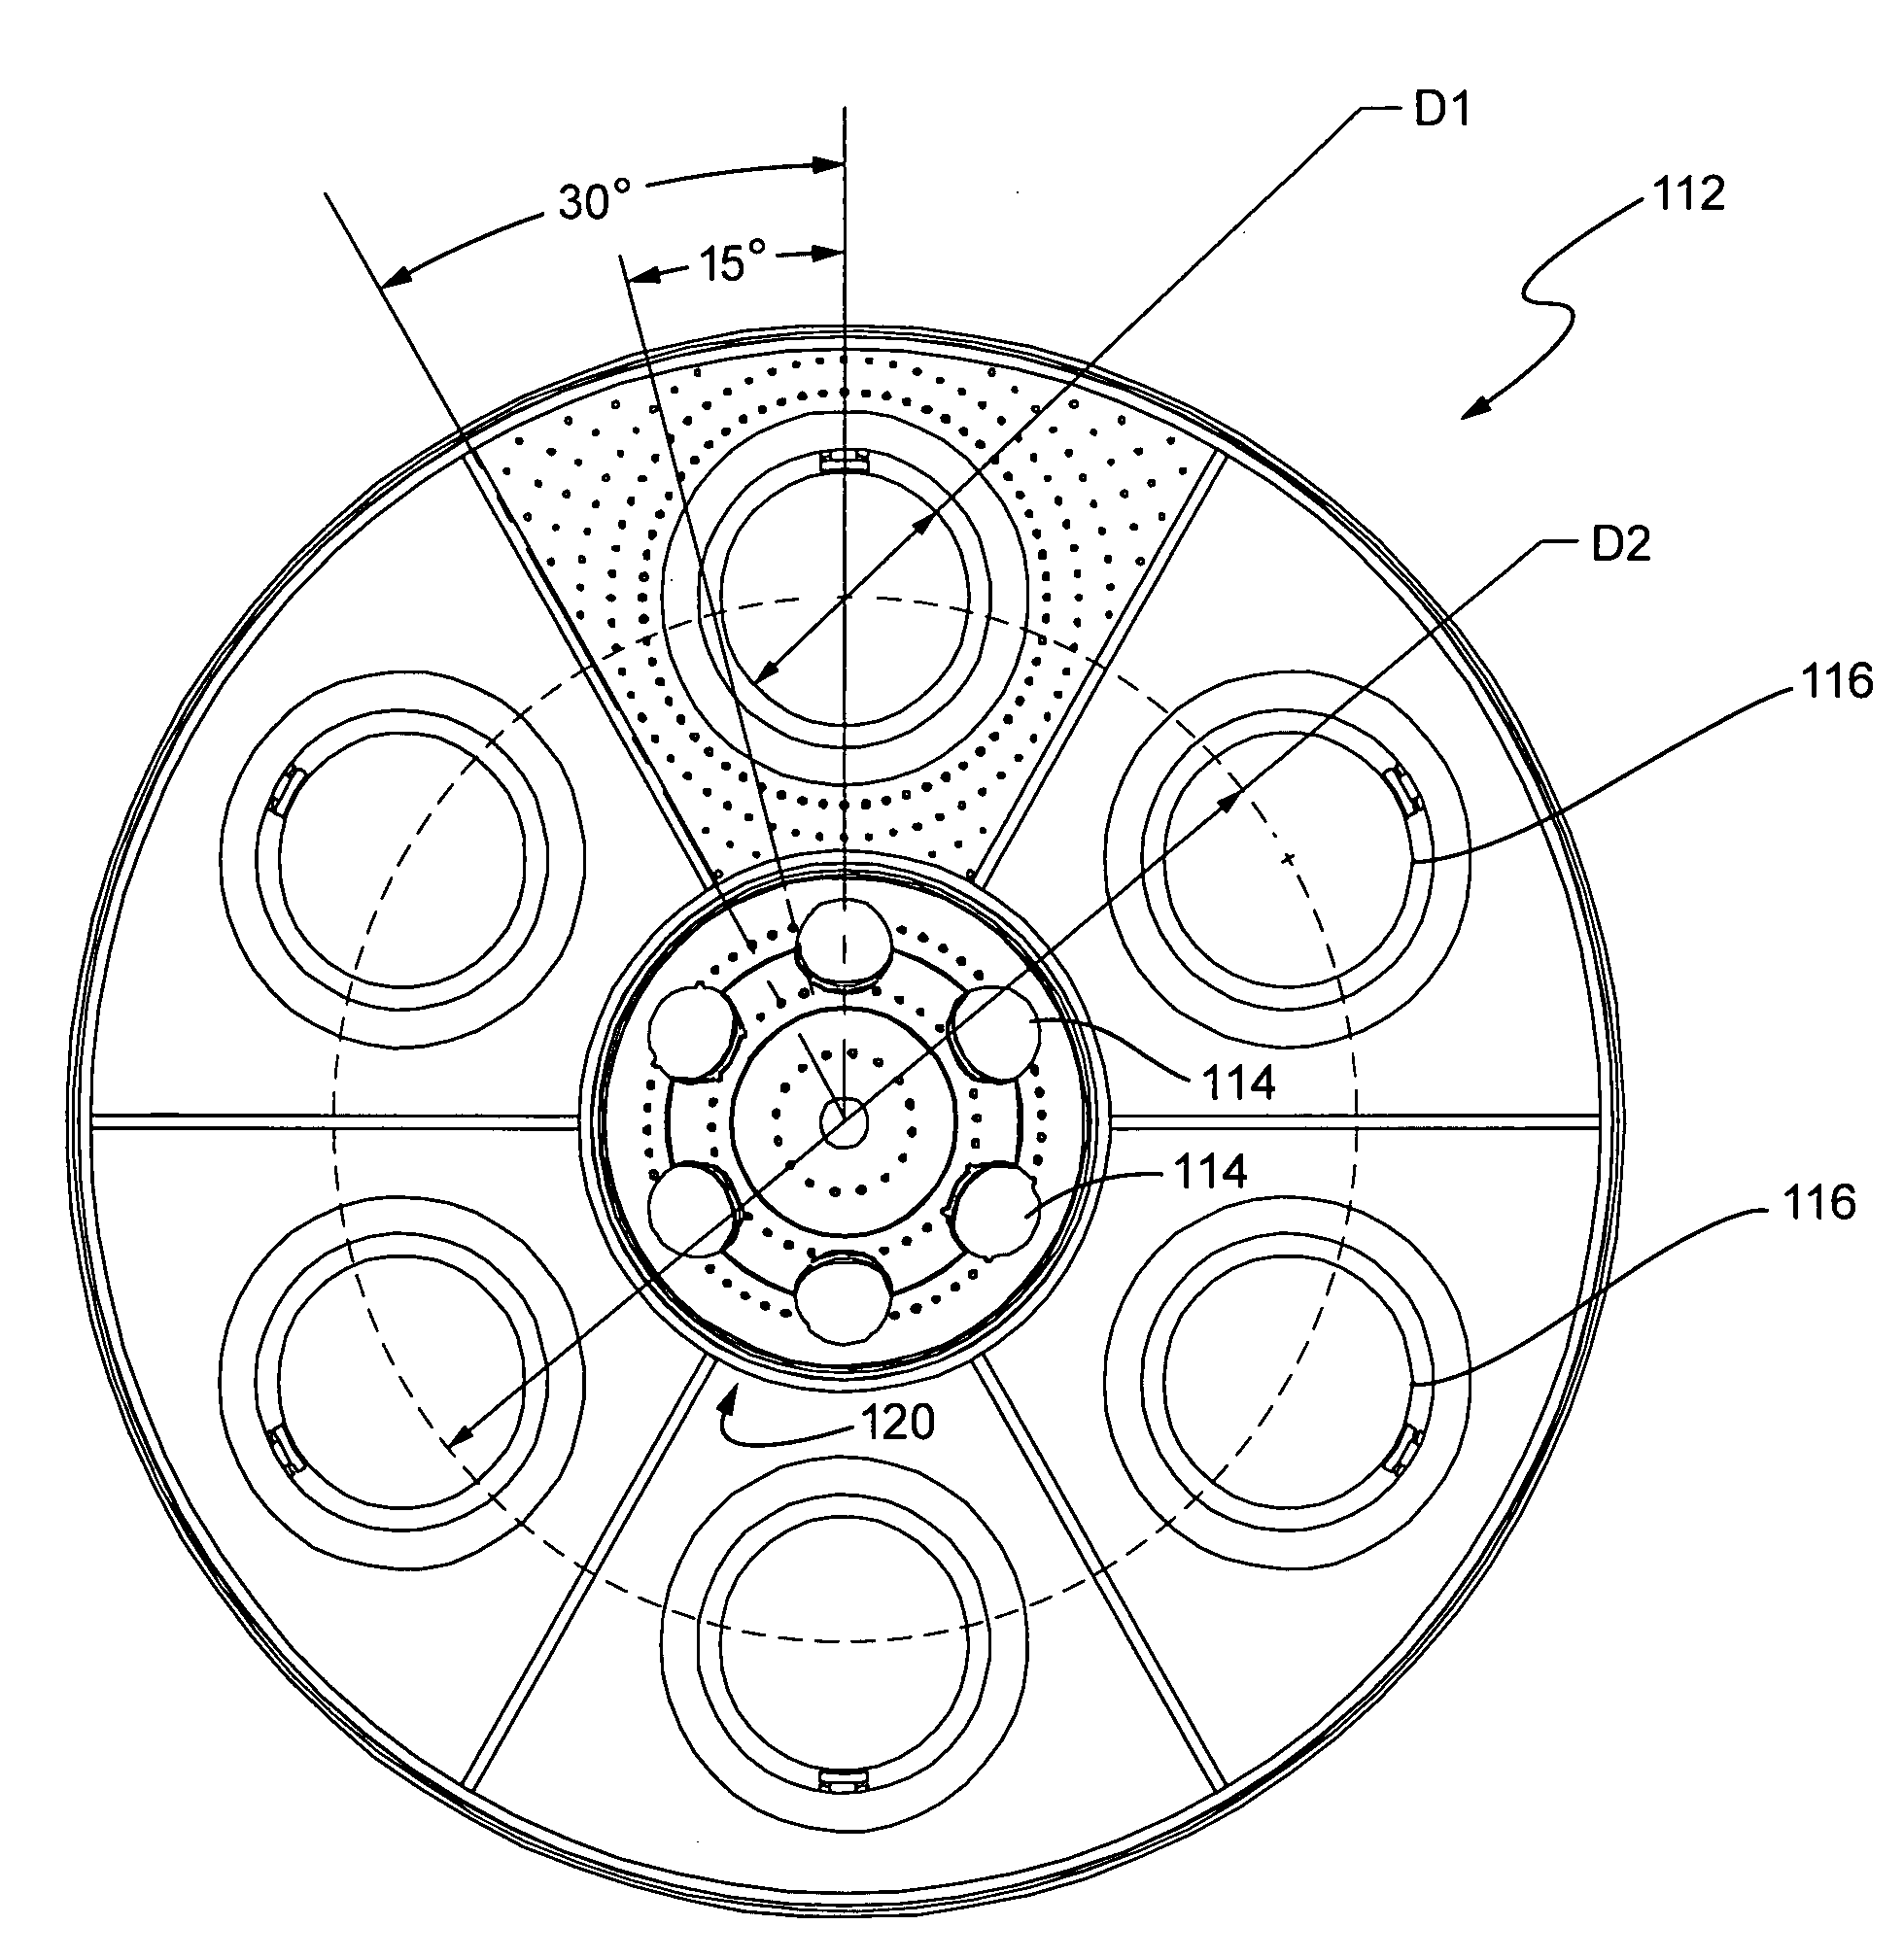 Combustion cap with crown mixing holes